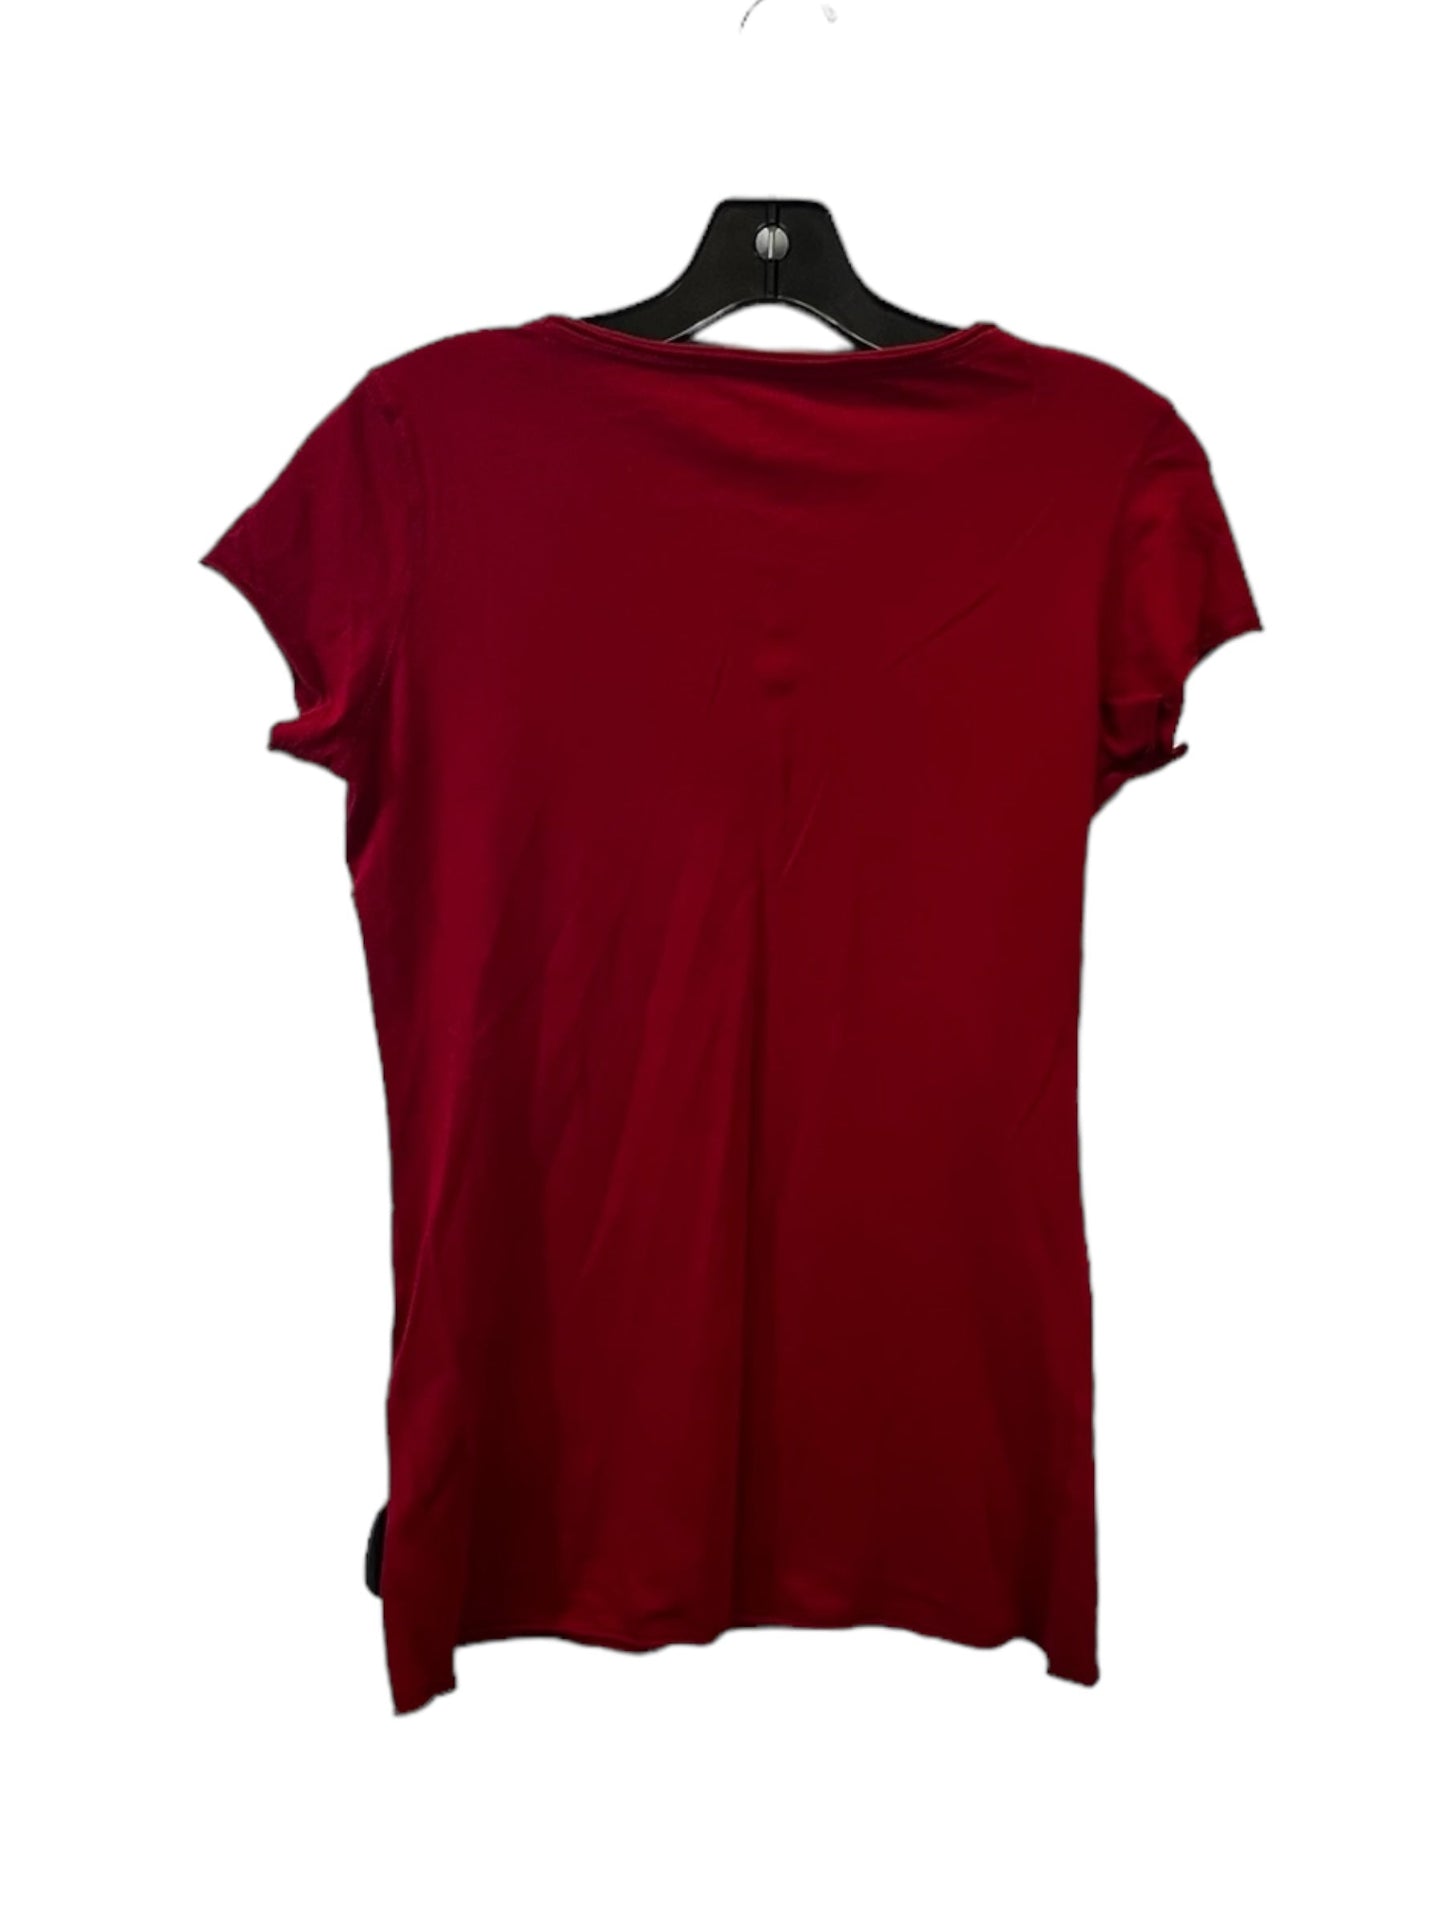 Red Top Short Sleeve Basic Gap, Size S